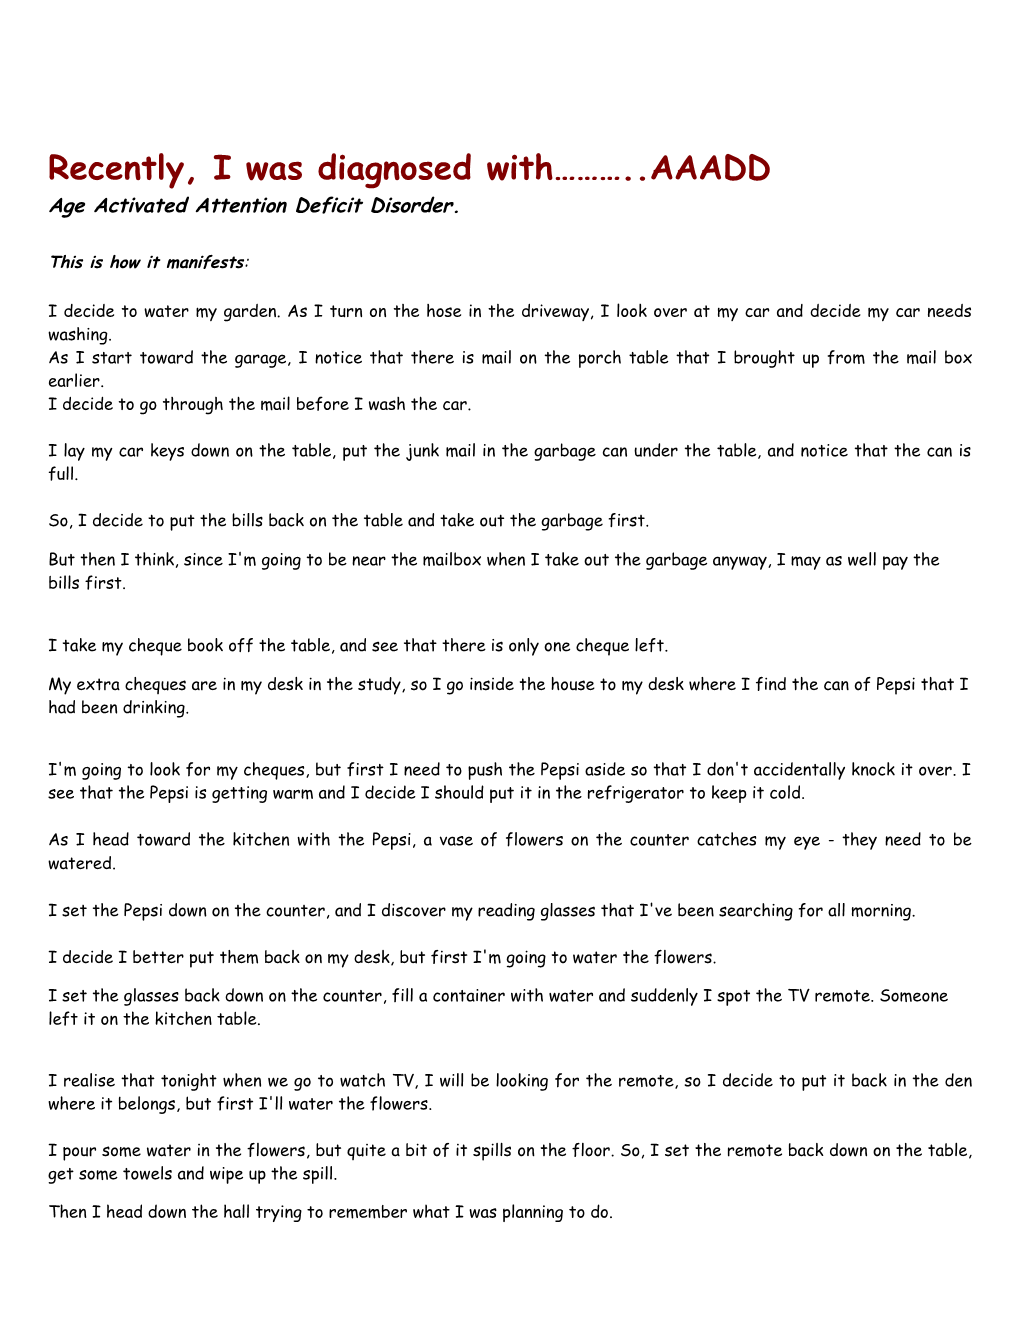 Recently, I Was Diagnosed with AAADD